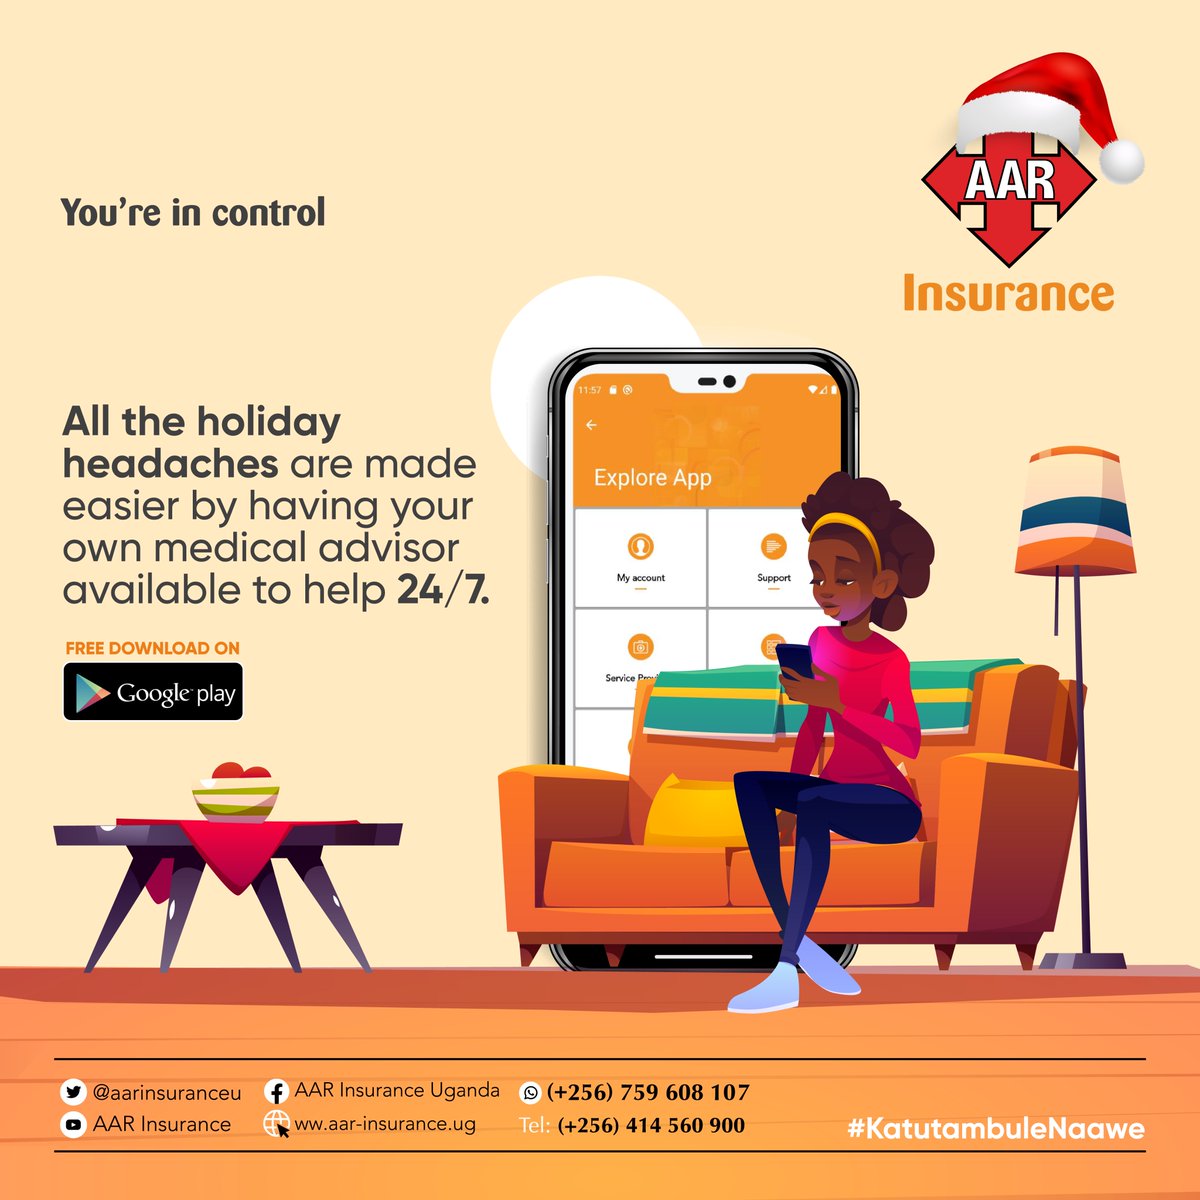 AAR Insurance app is here for you anytime, anyplace. Tap on the link and be empowered today.
play.google.com/store/apps/det… #AARInsurance #KatutambuleNawe